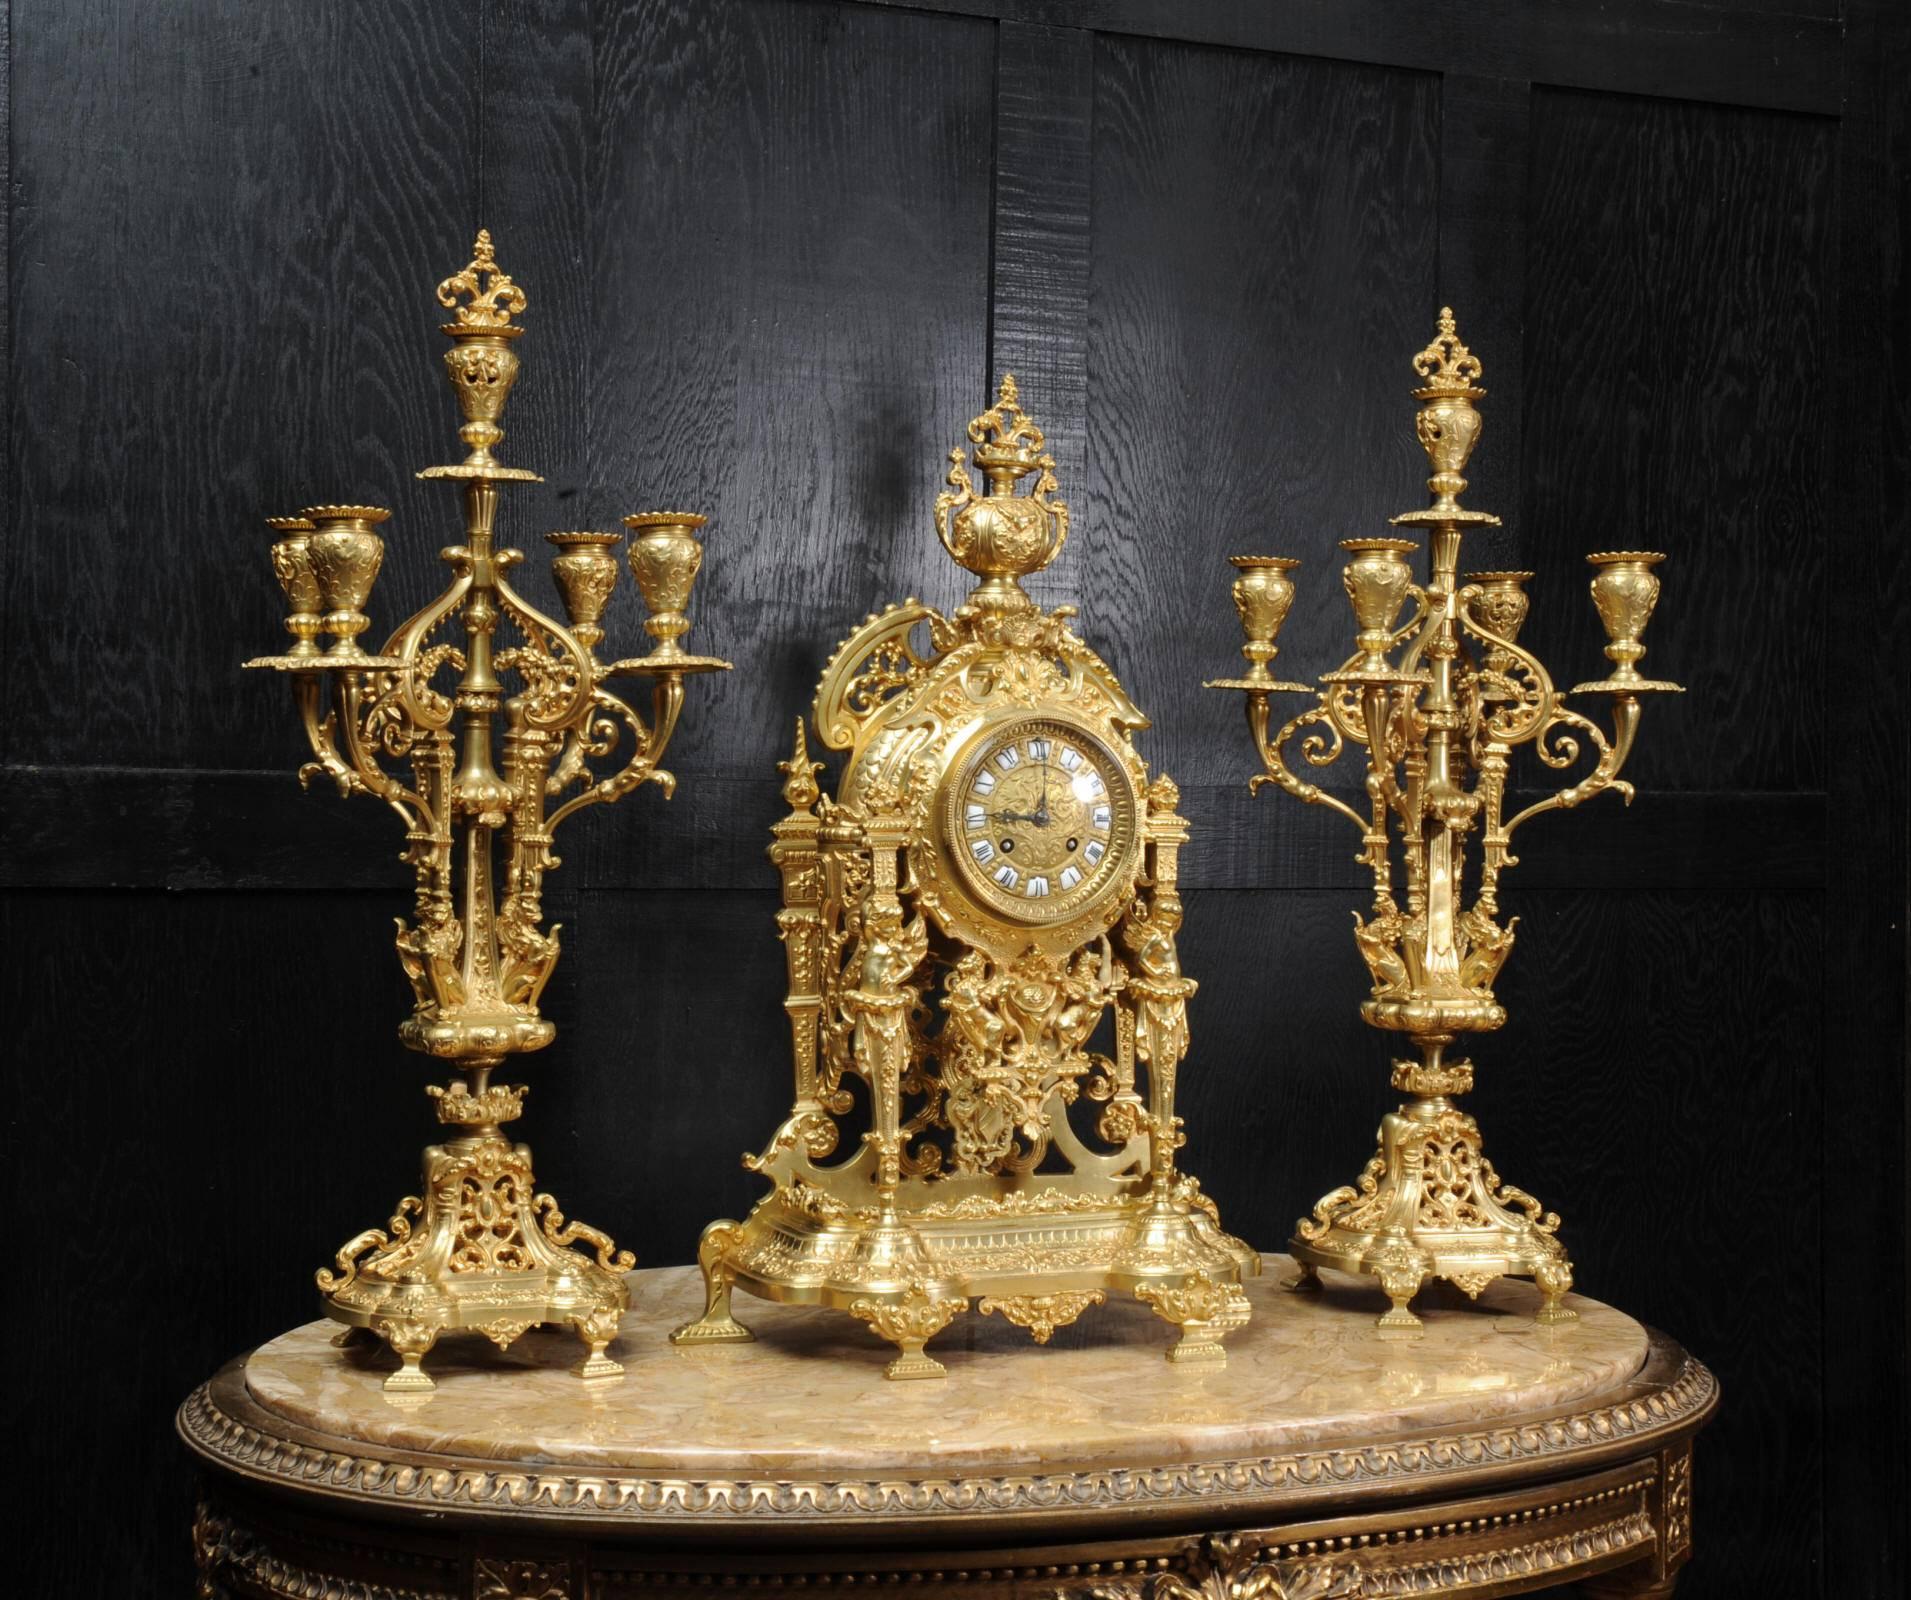 A very finely detailed gilt bronze clock set in excellent original condition, retailed by the Paris retailer Pierre Lemasson and dating from circa 1870. The style is Baroque. The clock movement is held aloft by cherubim forming the front pillars.